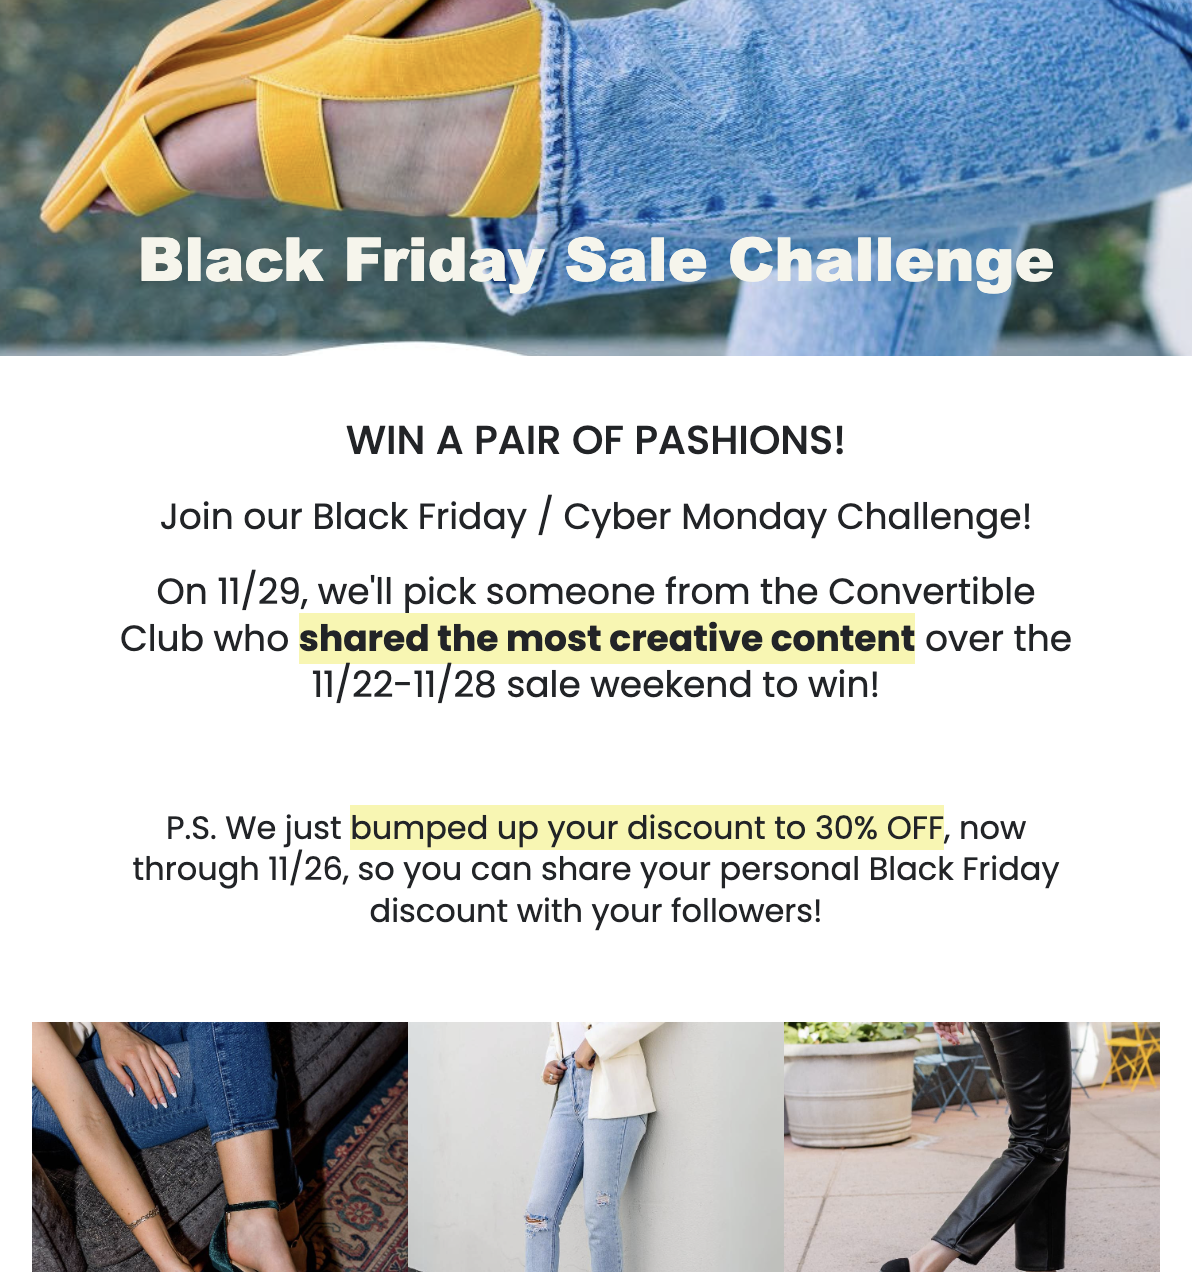 Pashion's Black Friday Sales challenge / influencer campaign